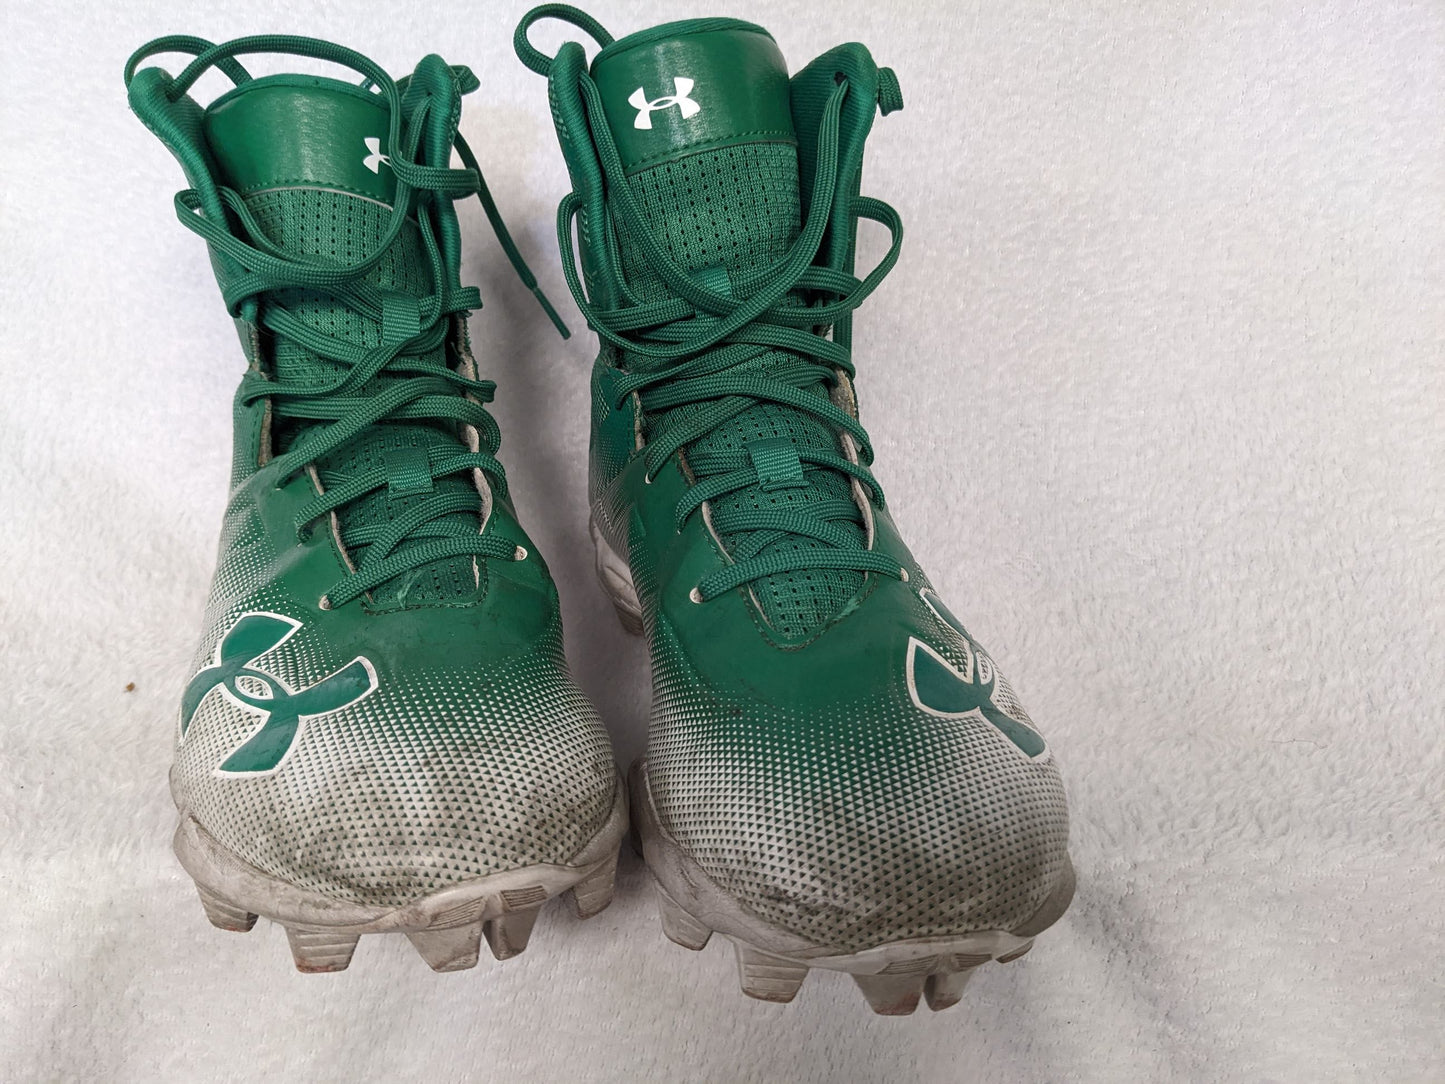 Under Armour Highlight High Top Cleats Size 5.5 Color Green Condition Used